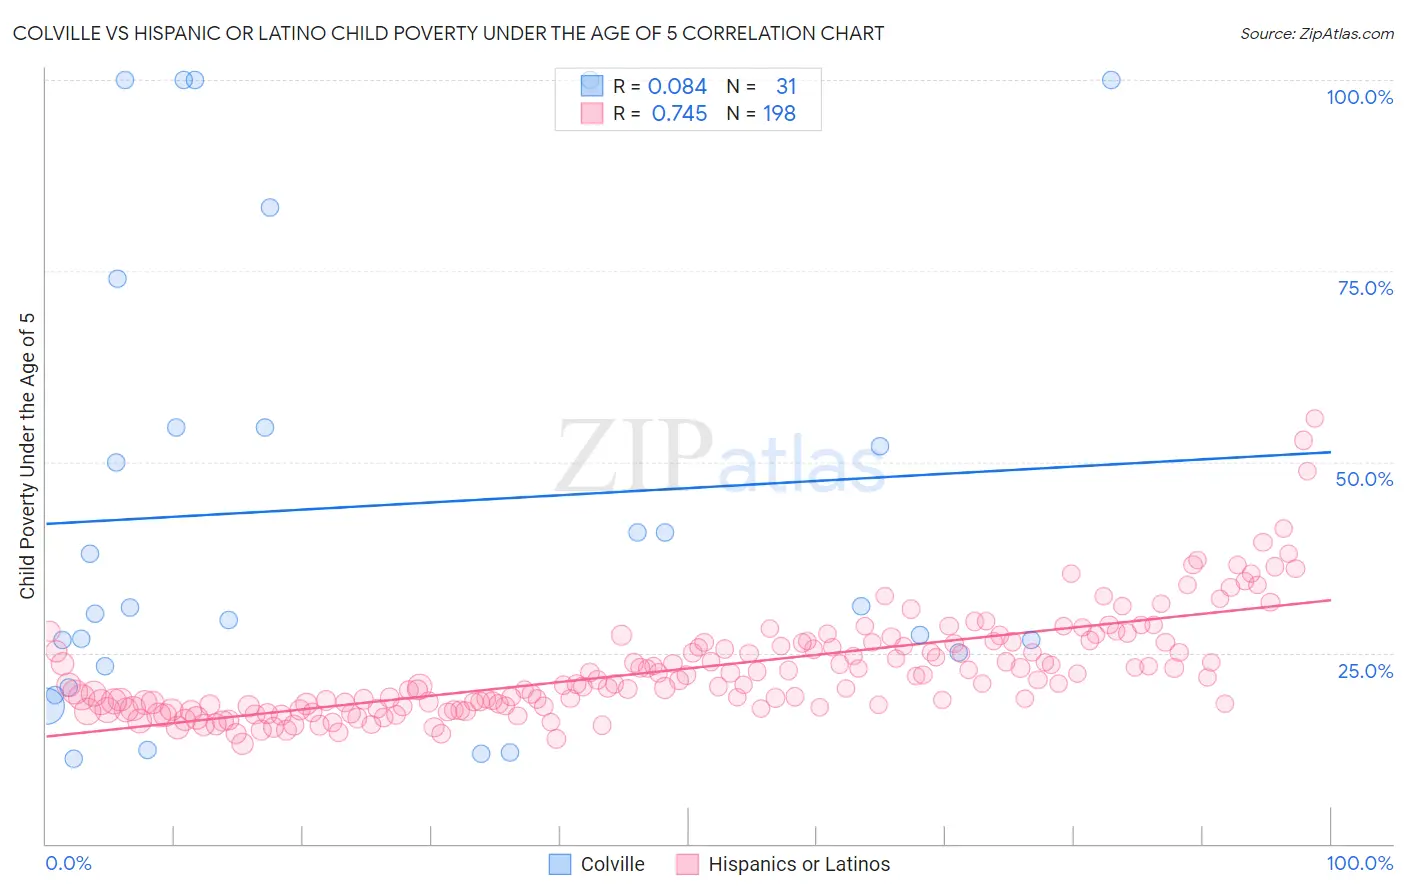 Colville vs Hispanic or Latino Child Poverty Under the Age of 5